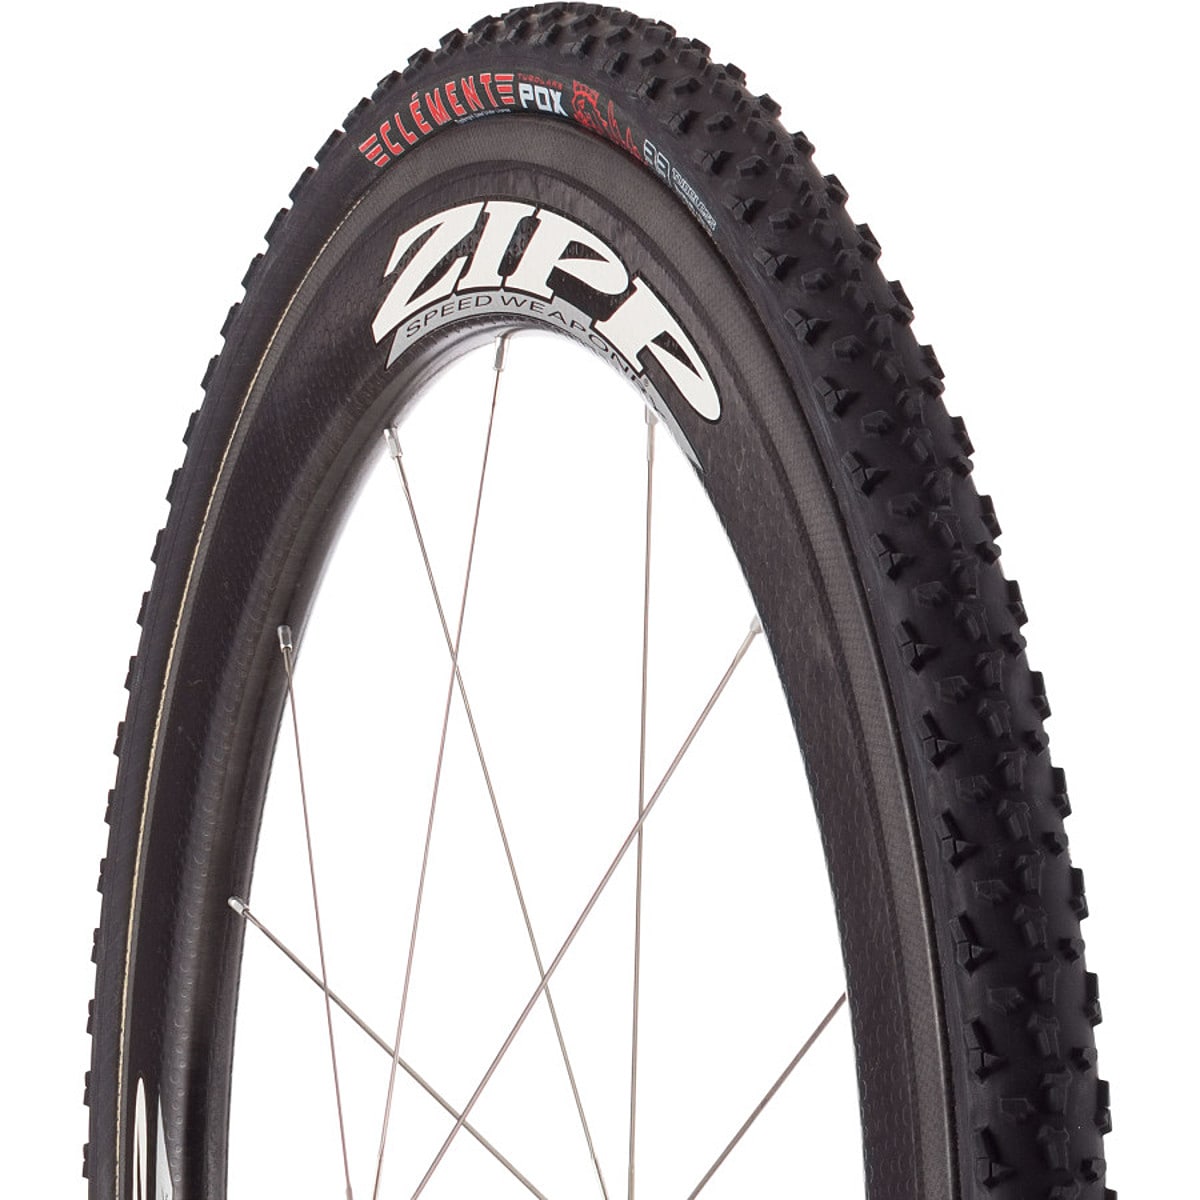 Clement PDX Tire Tubular